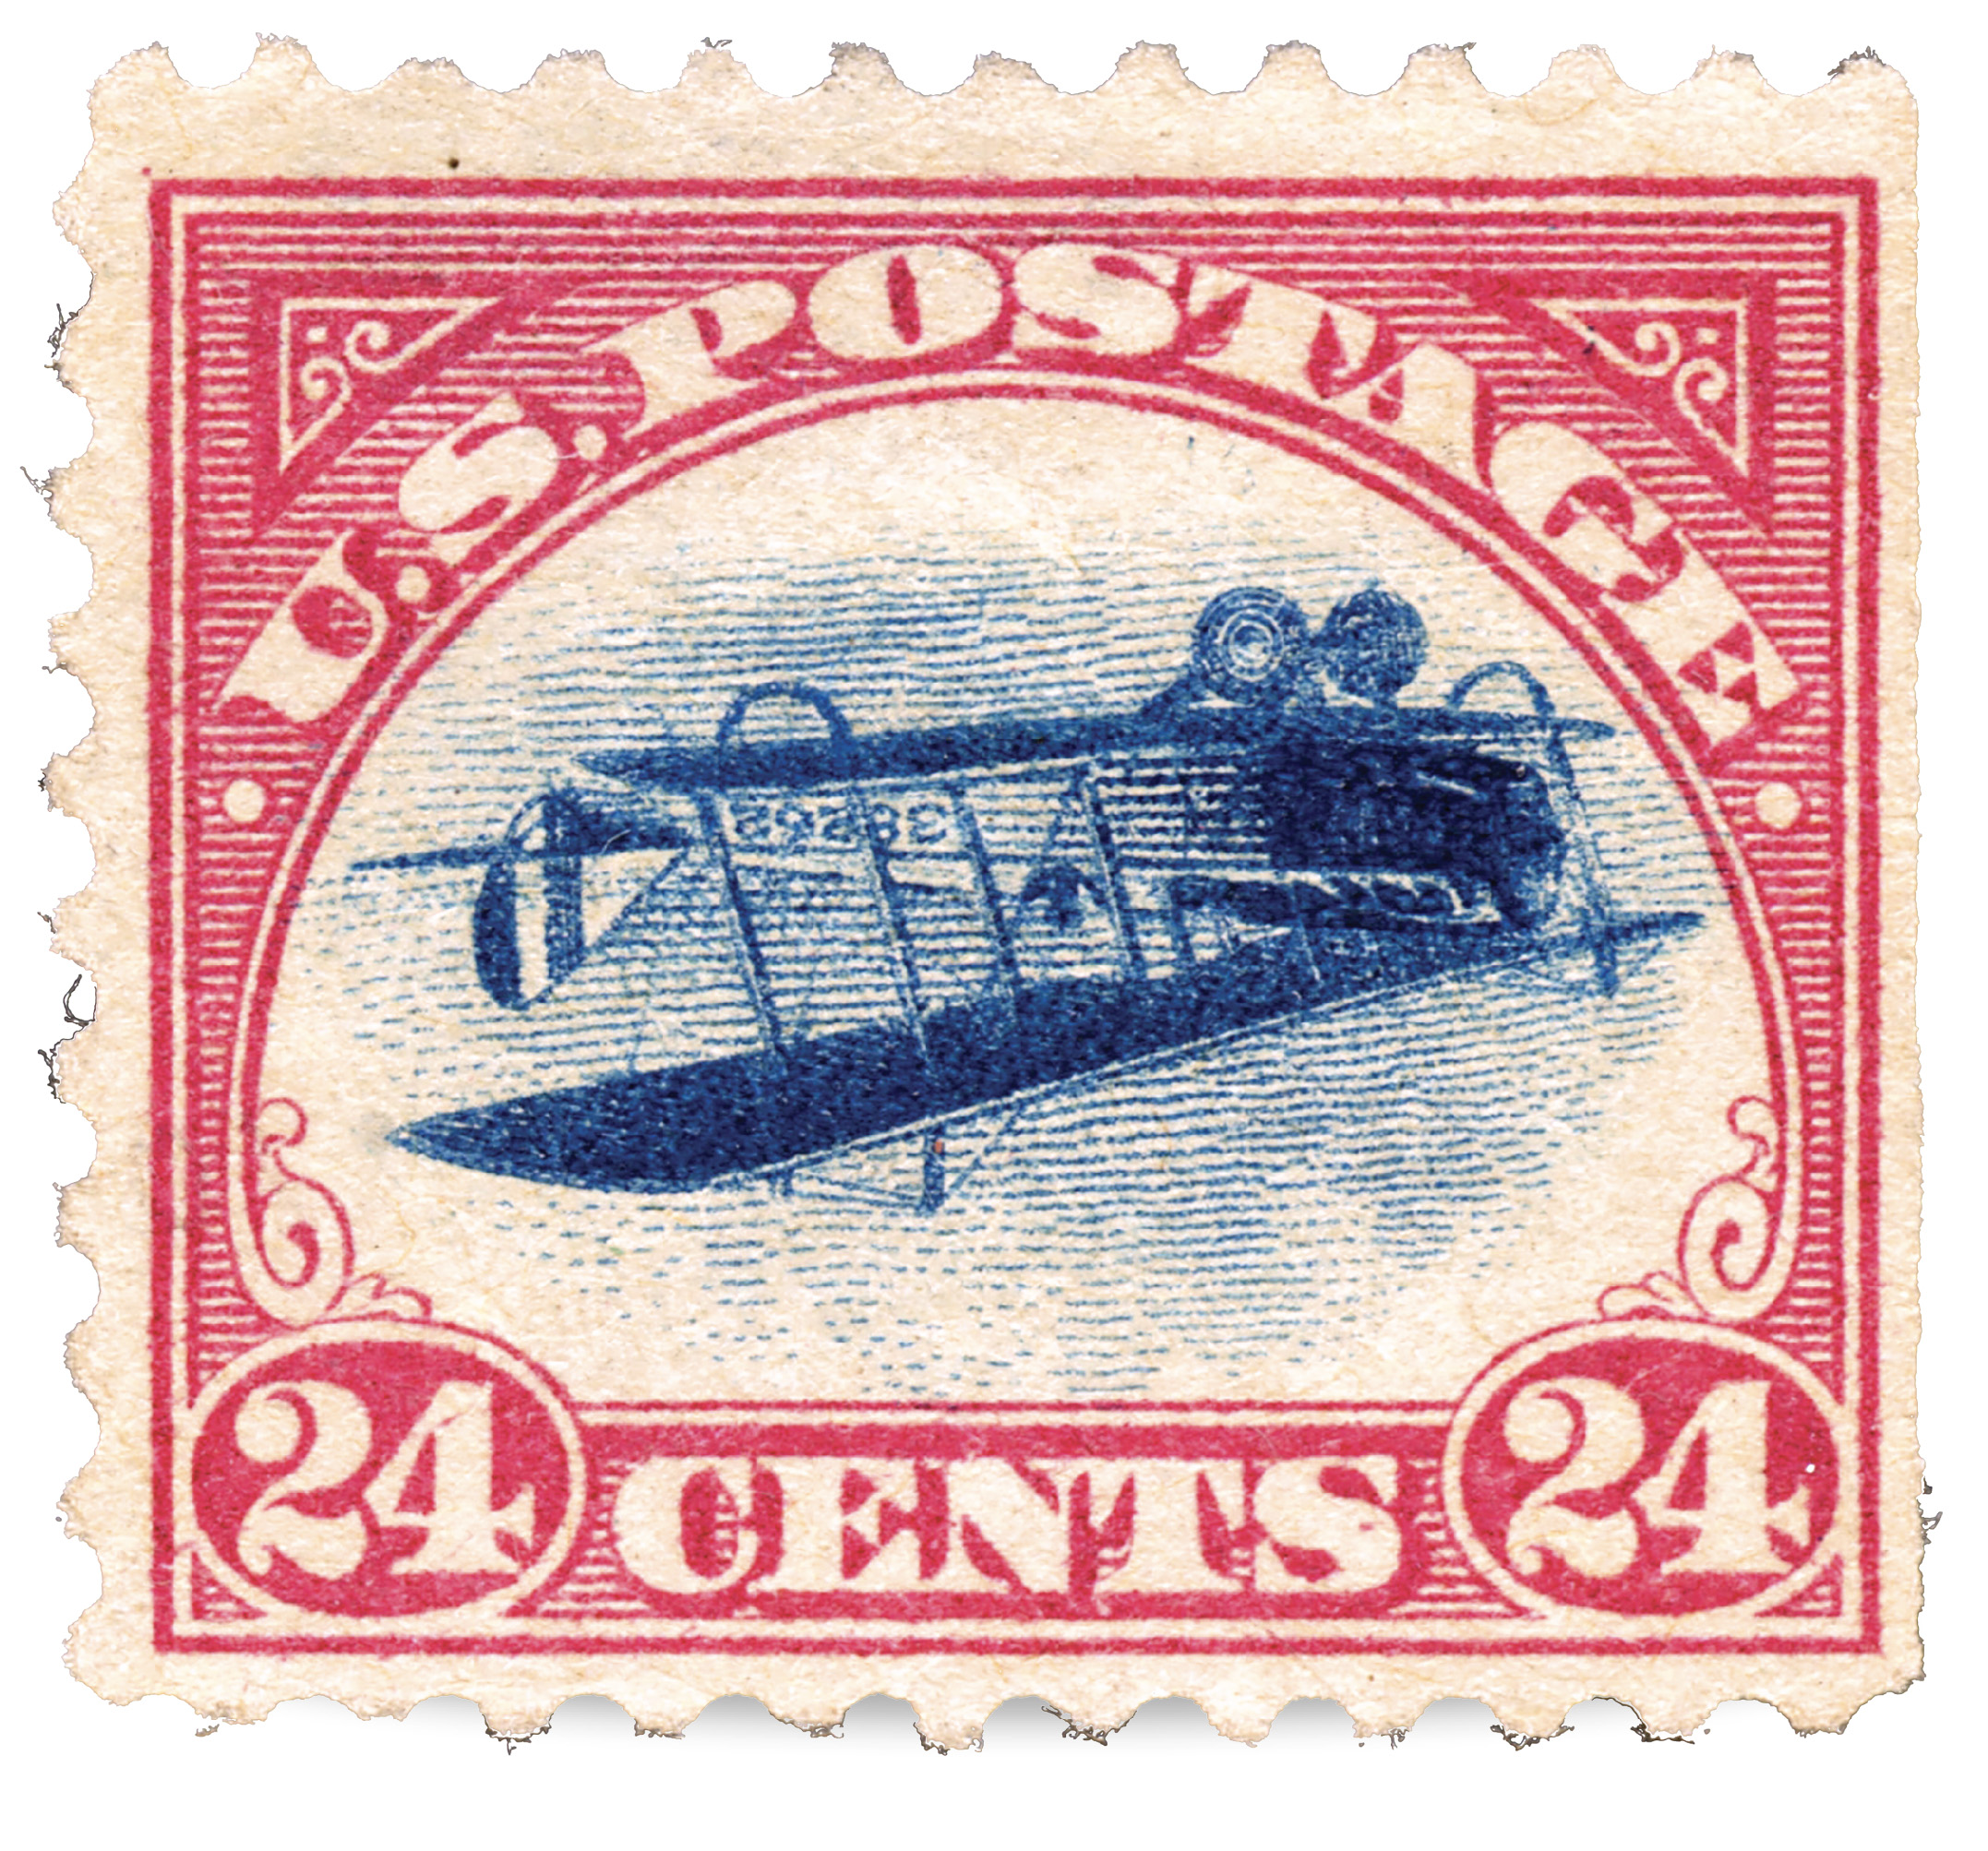 Would You Pay $2 Million For This Stamp?